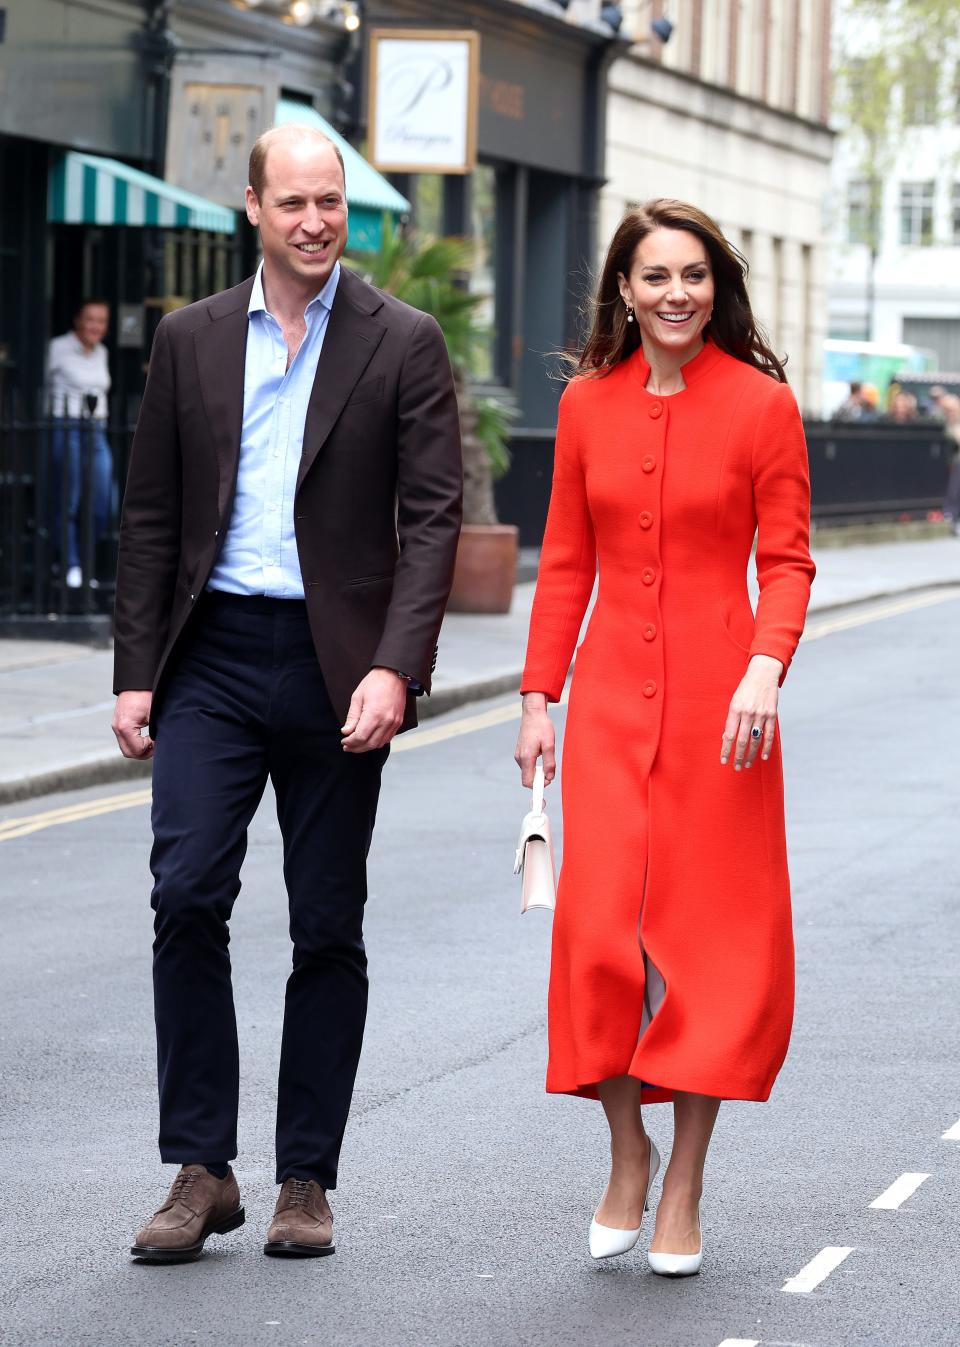 Prince William and Kate Middleton visit a pub ahead of the coronation.